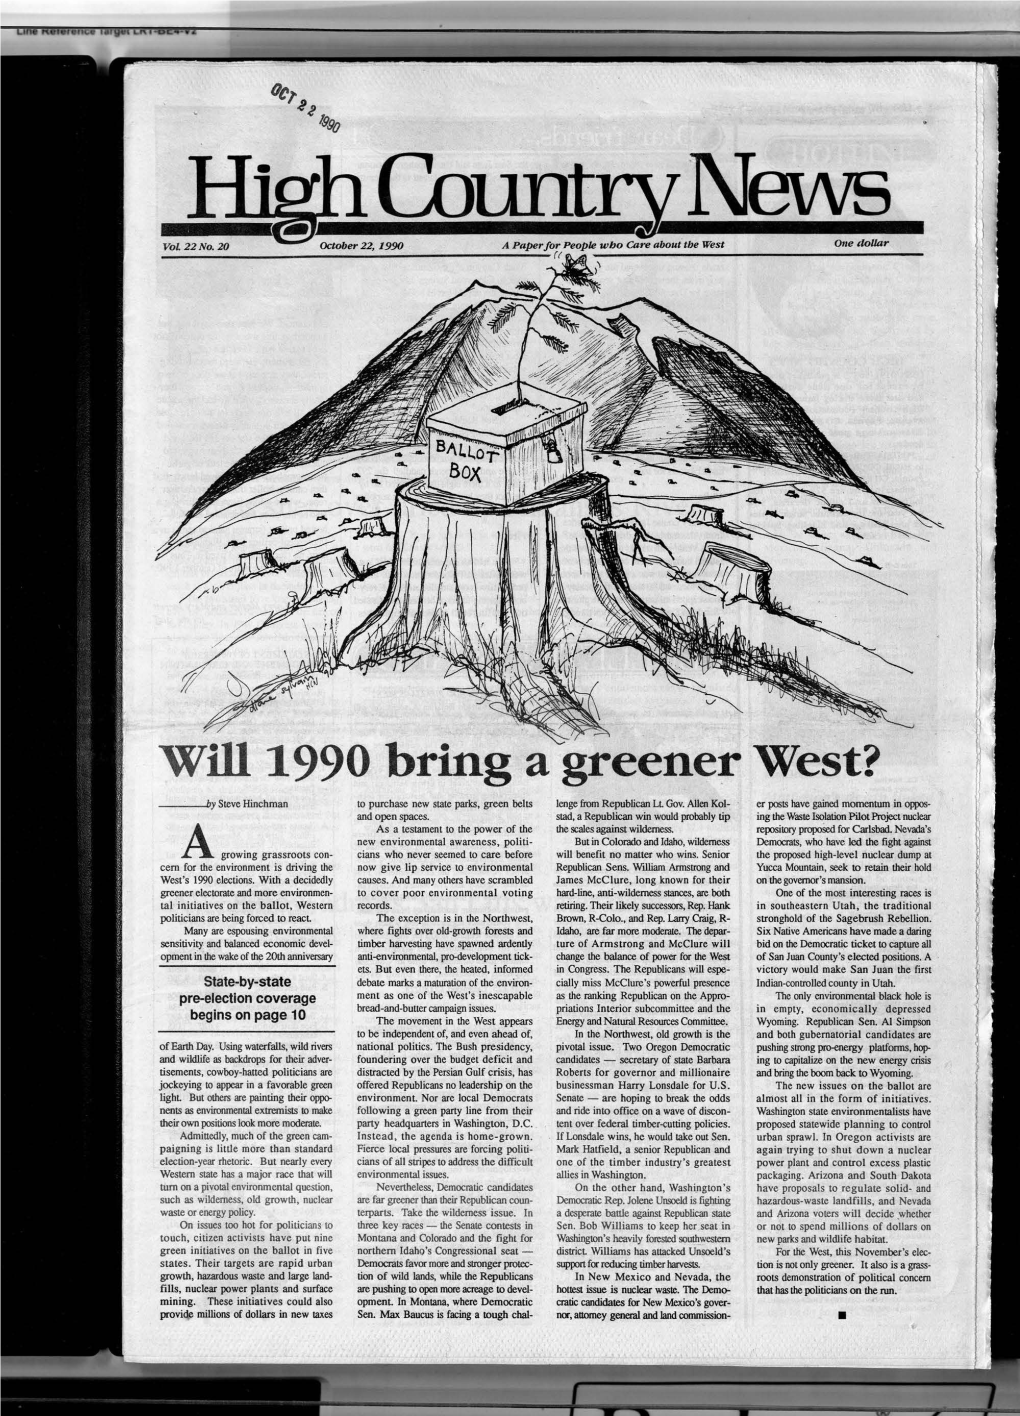 High Country News Vol. 22.20, Oct. 22, 1990